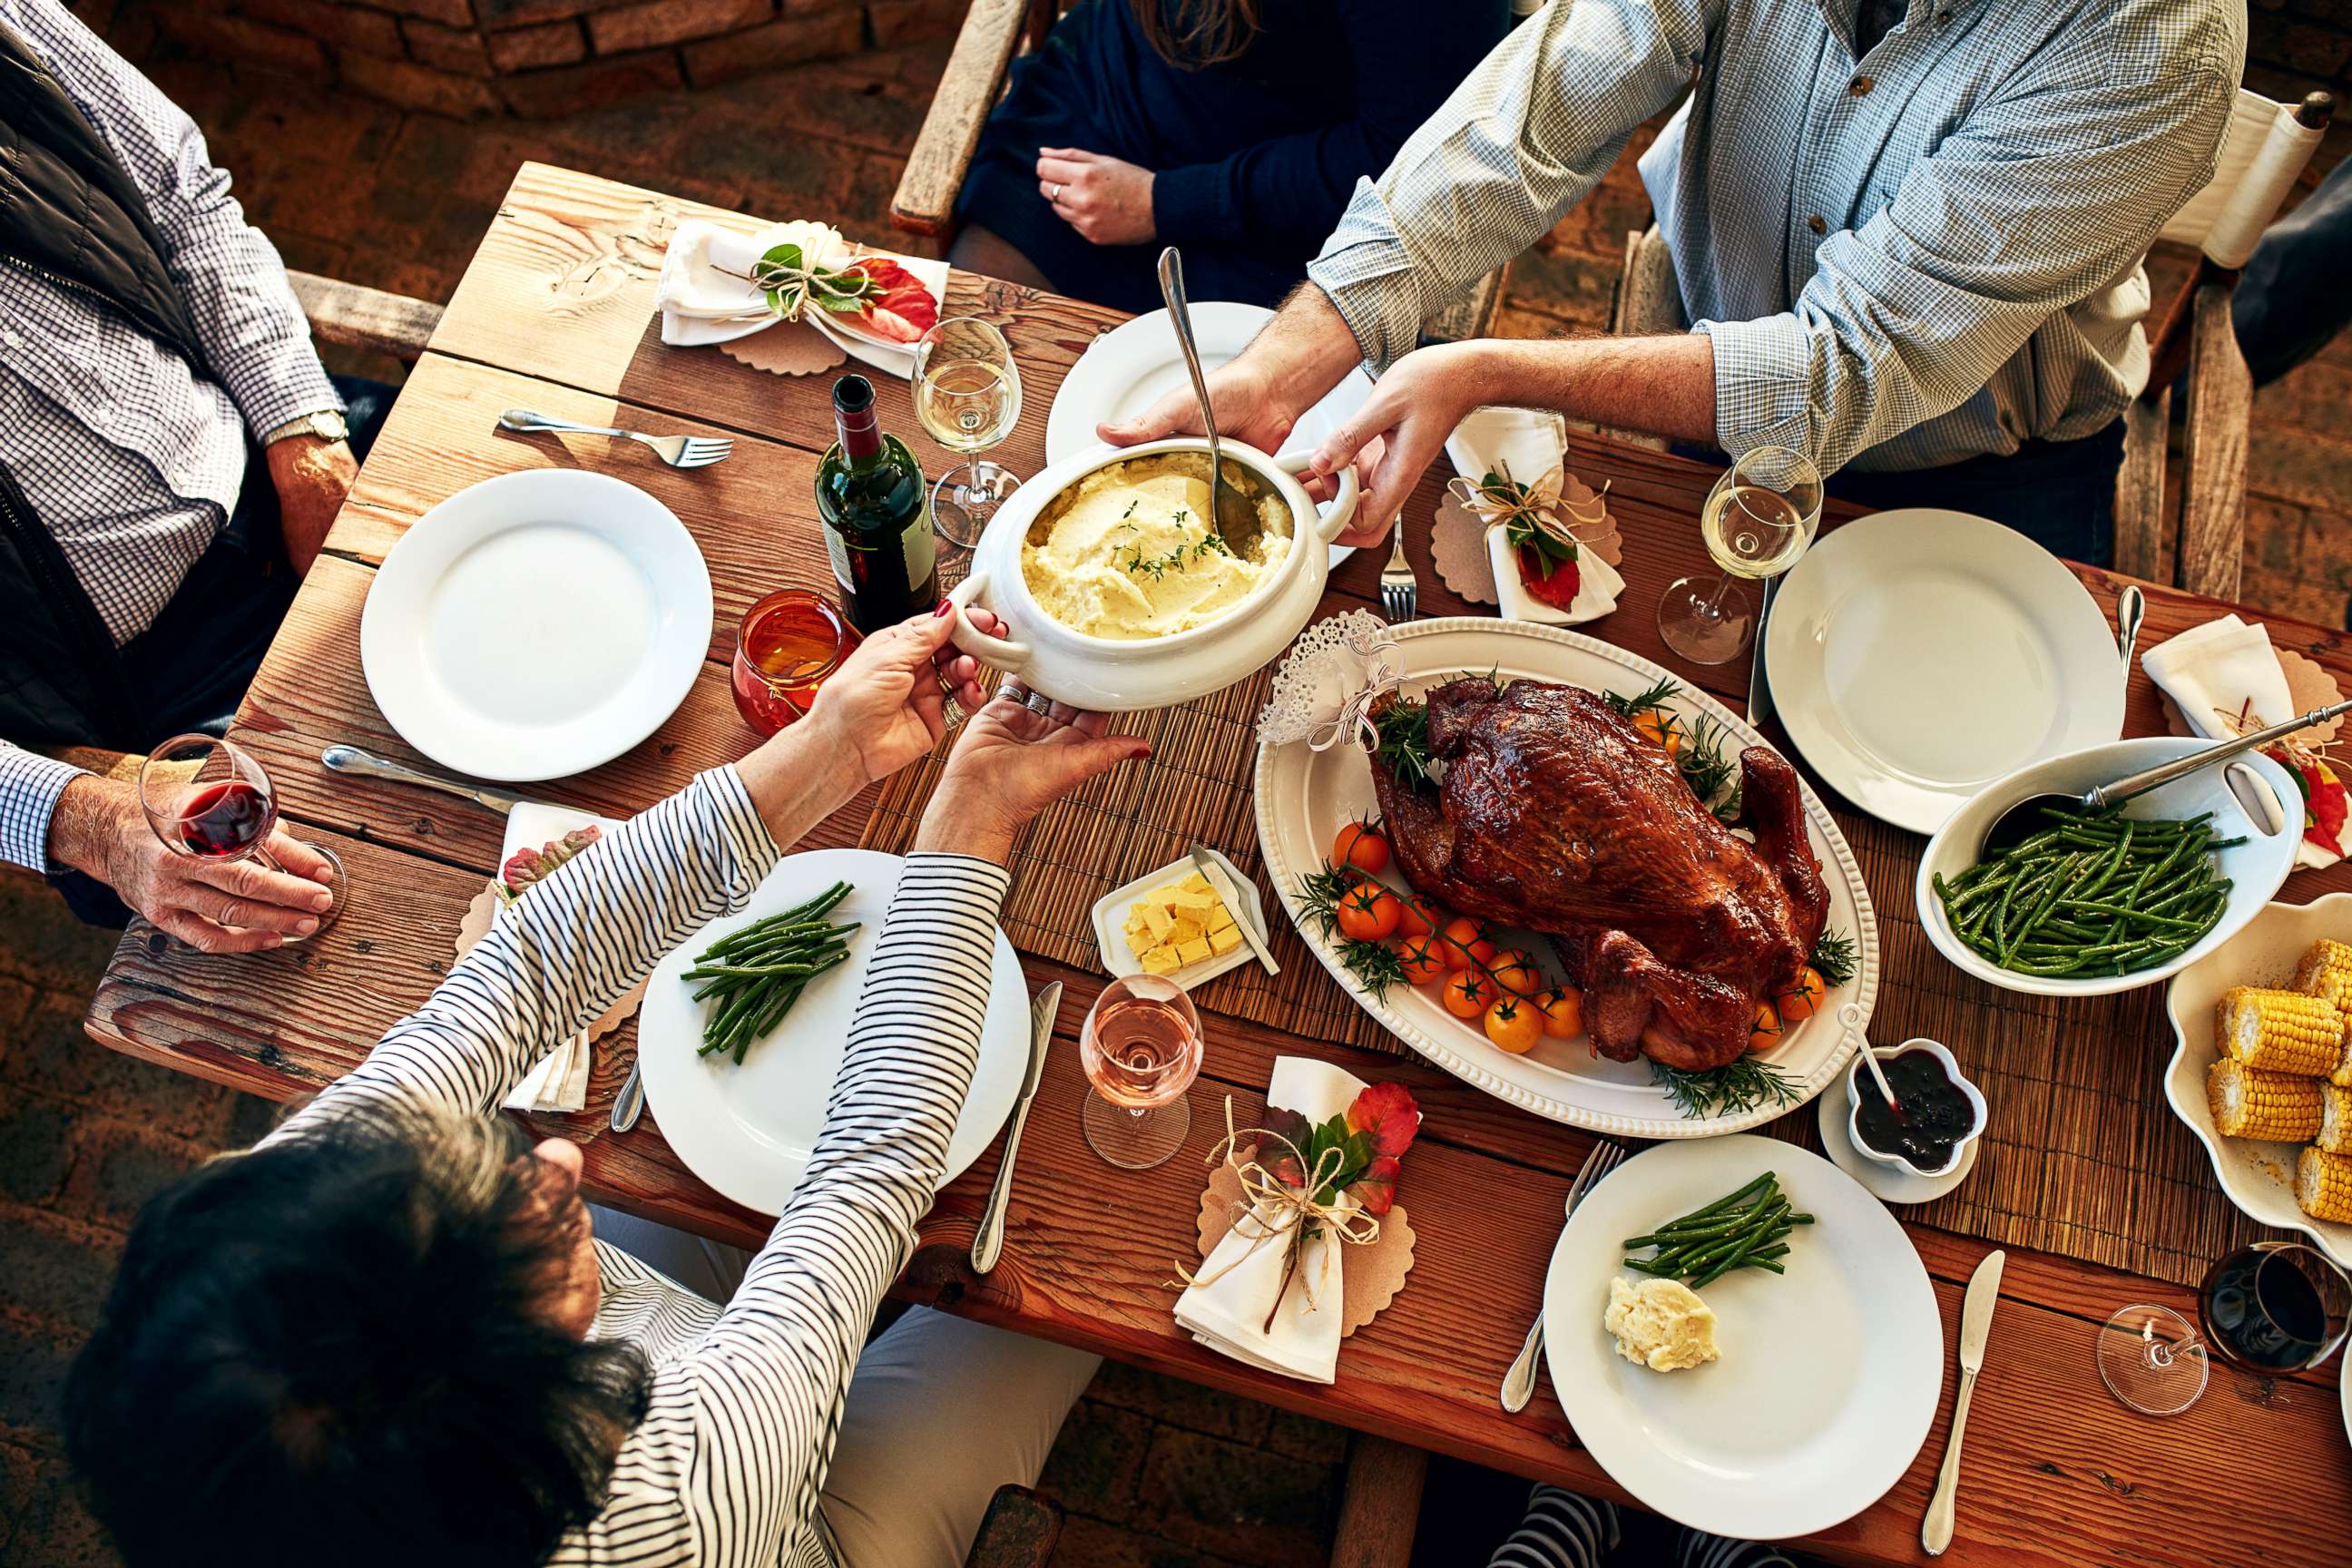 PHOTO: This stock photo depicts a family enjoying a Thanksgiving meal.